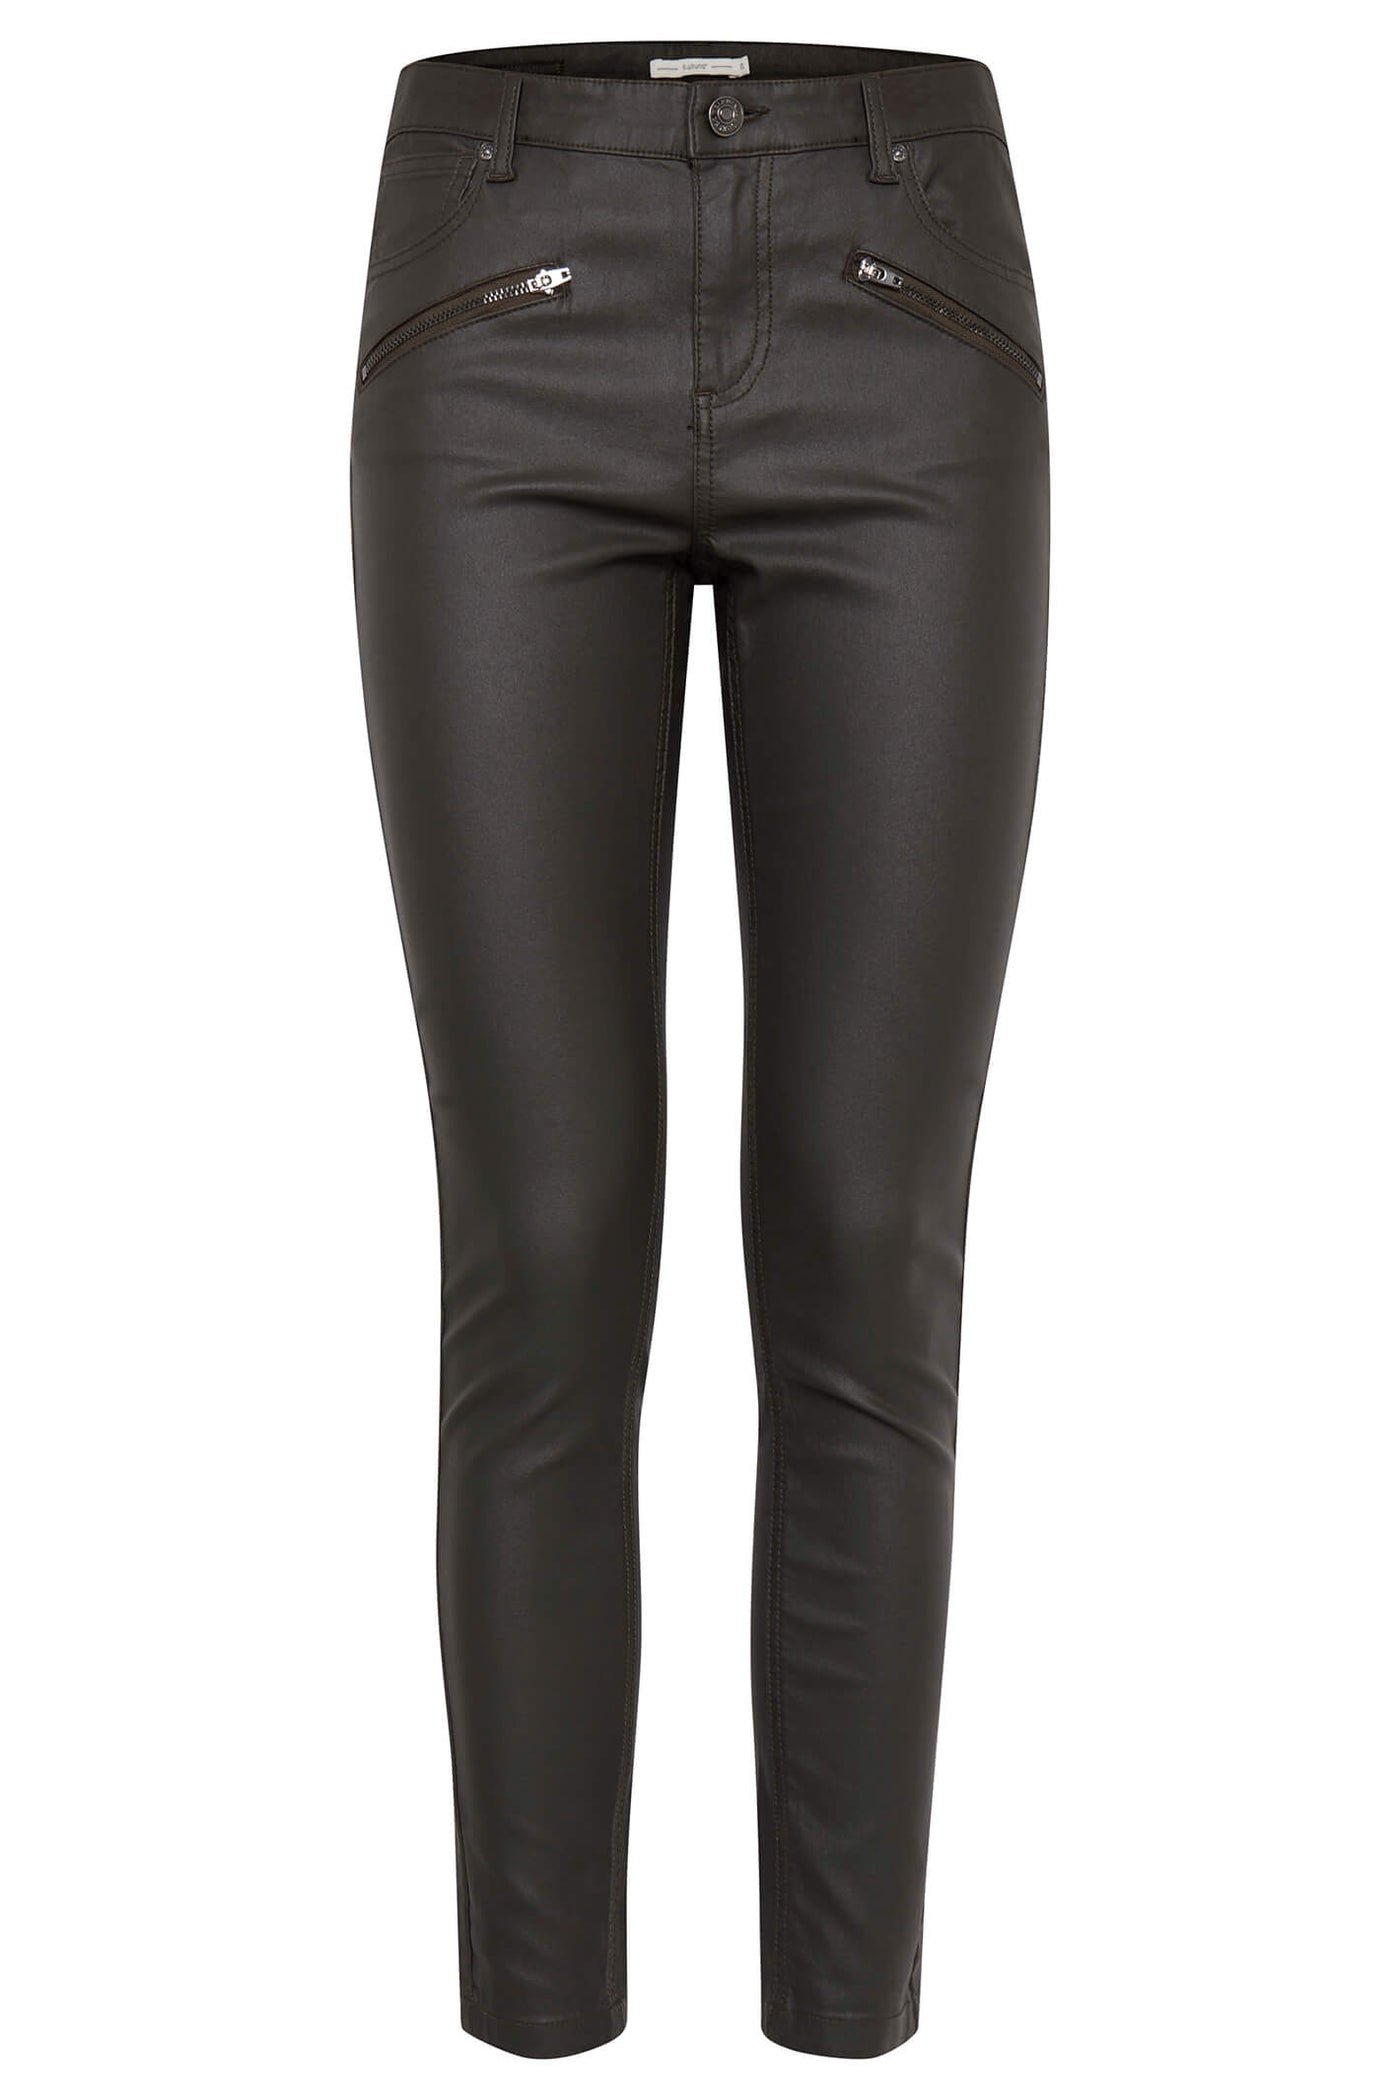 b.young 20806816 Dark Grey Leather Look Jeans - Jezabel Boutique